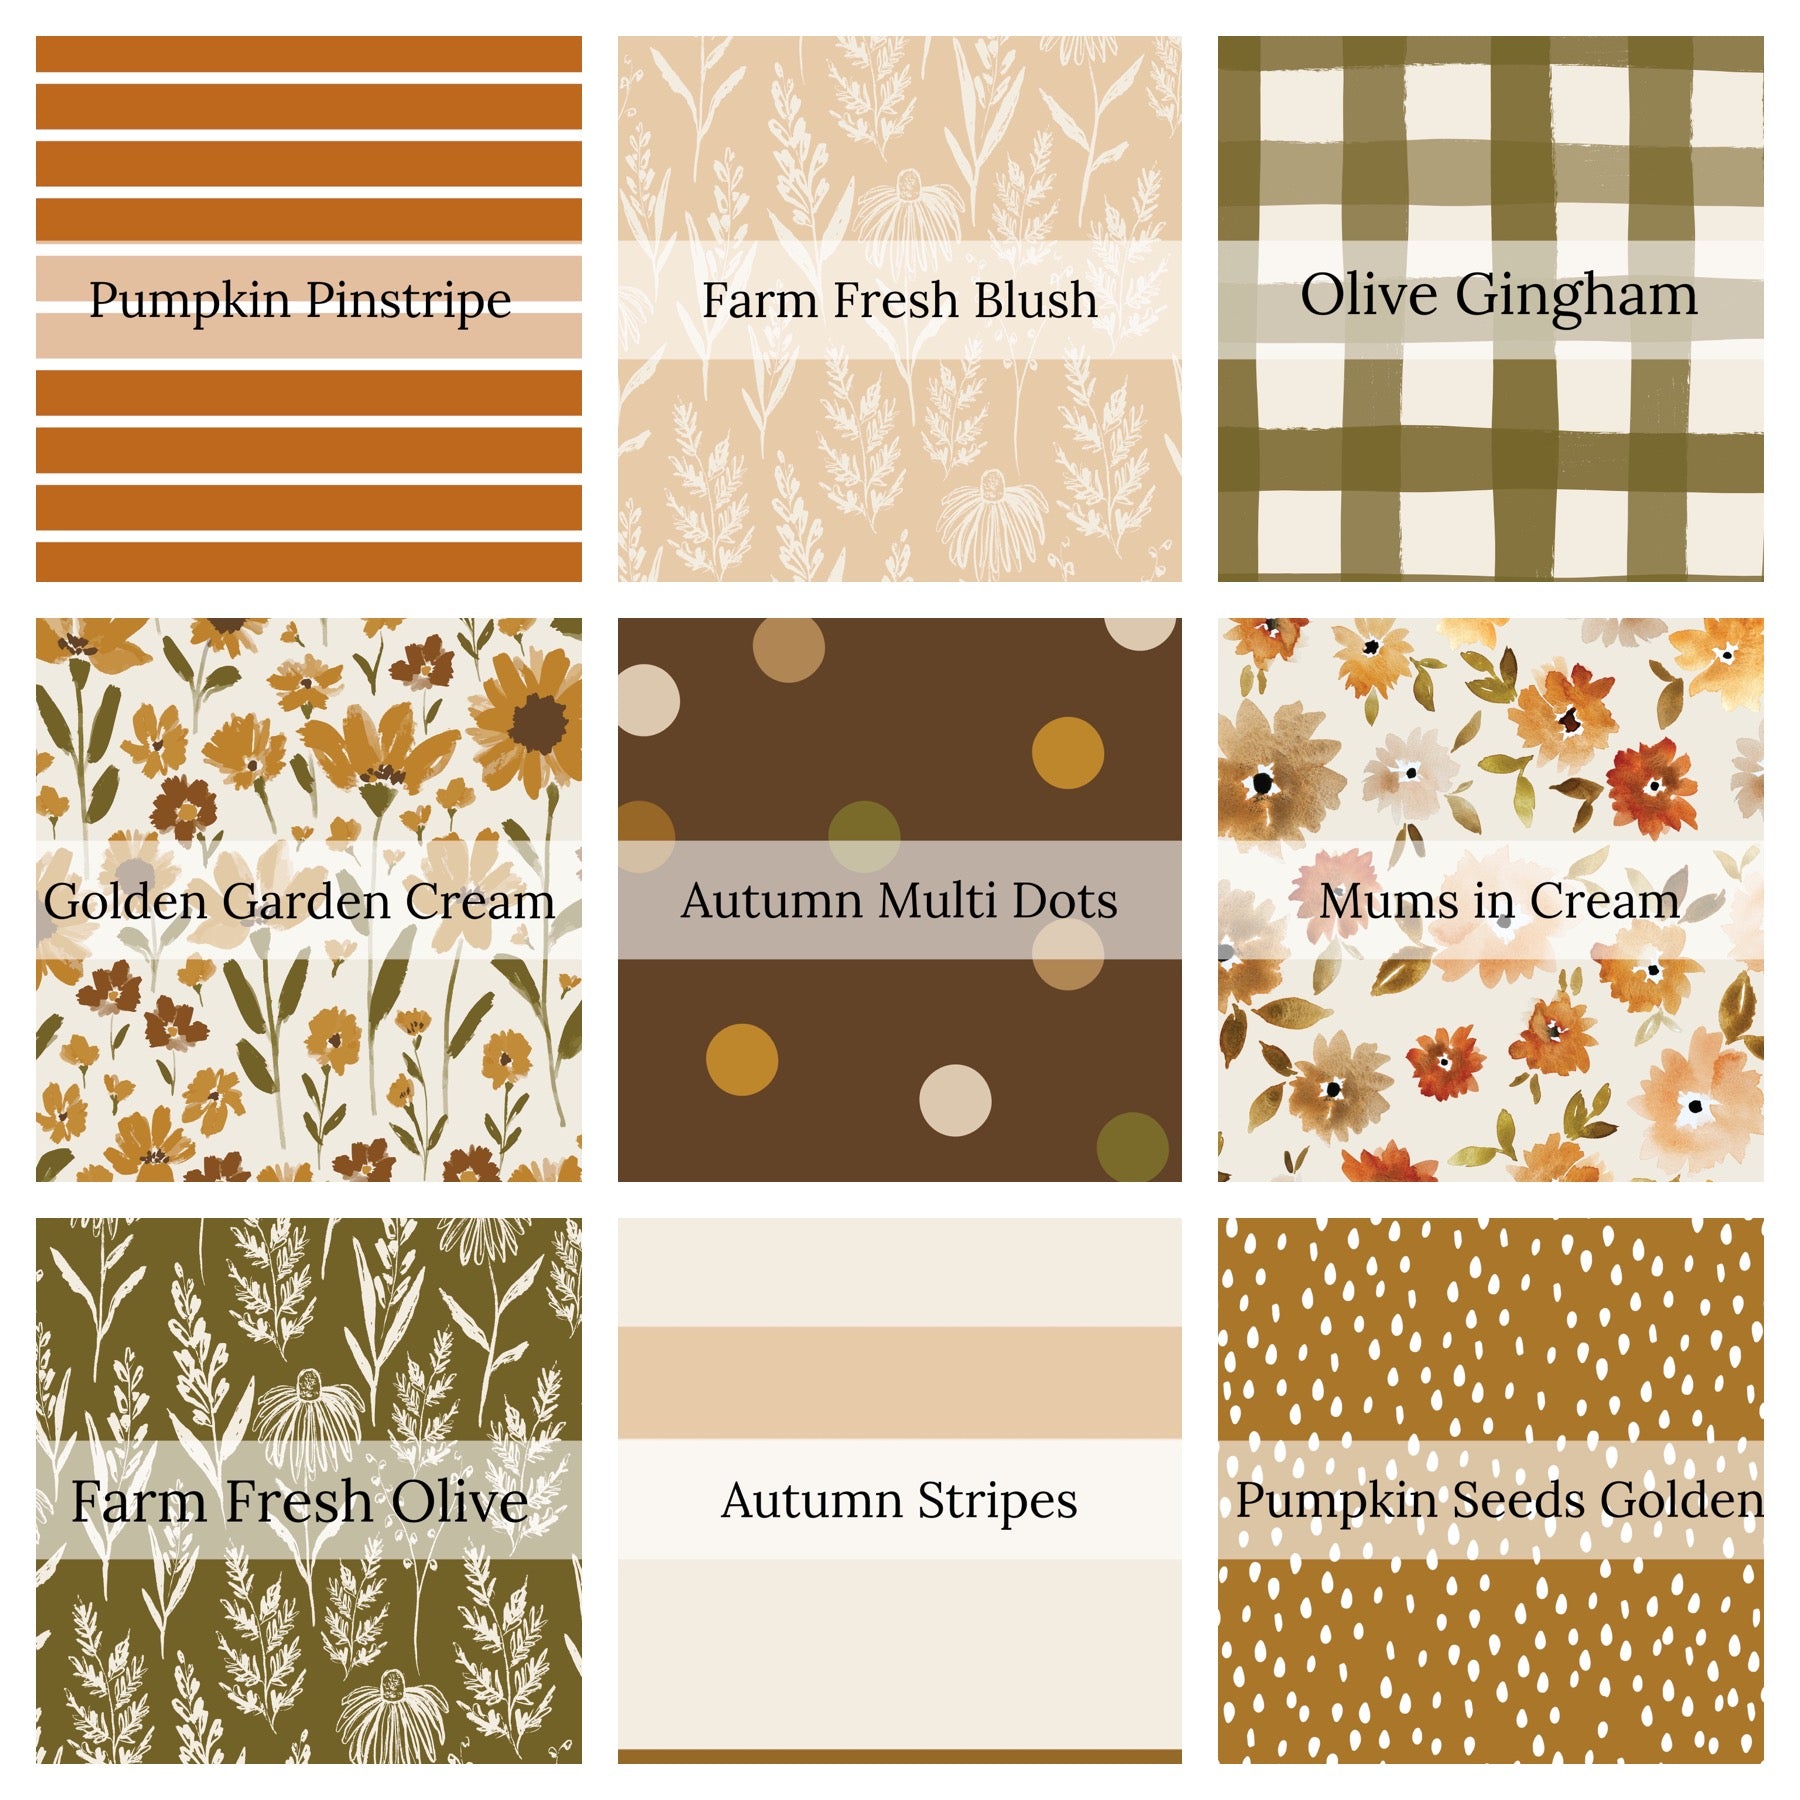 Cream, brown, and green floral, plaid, stripes, and dots high quality fabric adaptable for all your crafting needs. Make cute baby headwraps, fun girl hairbows, knotted headbands for adults or kids, clothing, and more.